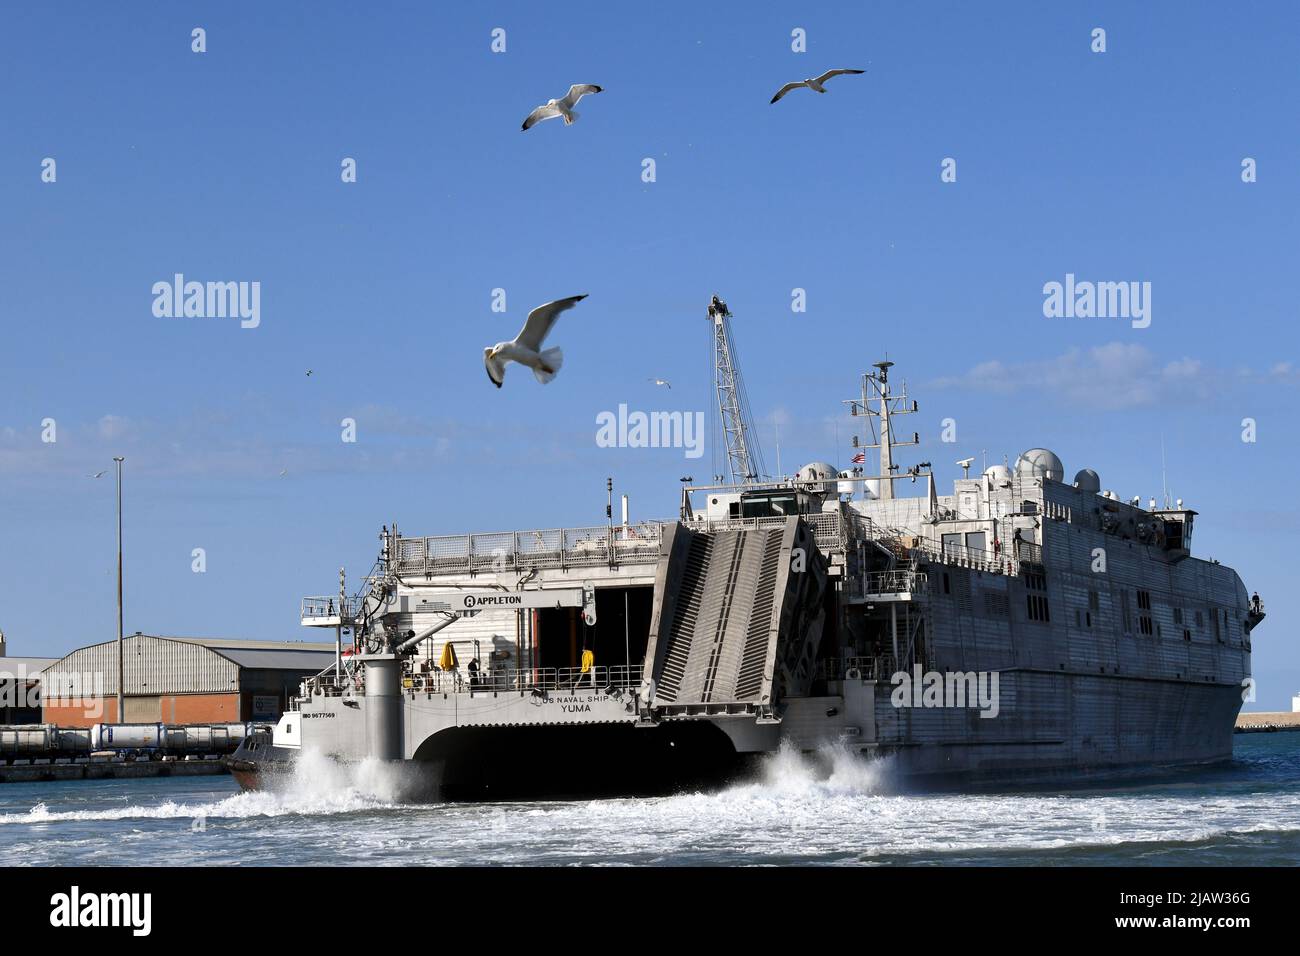 The Military Sealift Command Vessel, USNS Yuma enters Livorno port. Logisticians from multiple Southern European Task Force-Africa units including the 839th Transportation Battalion, the 173rd Airborne Brigade, the 207th Military Intelligence Brigade, and the 23rd Modular Ordnance Ammunition Company all worked together at the Port of Livorno, Italy to upload the Military Sealift Command Vessel, USNS Yuma. The equipment will transit from locations across Europe to Agadir, Morocco as part of exercise African Lion 22, Livorno, Italy, May 29, 2022. (U.S. Army photo by Elena Baladelli) Stock Photo